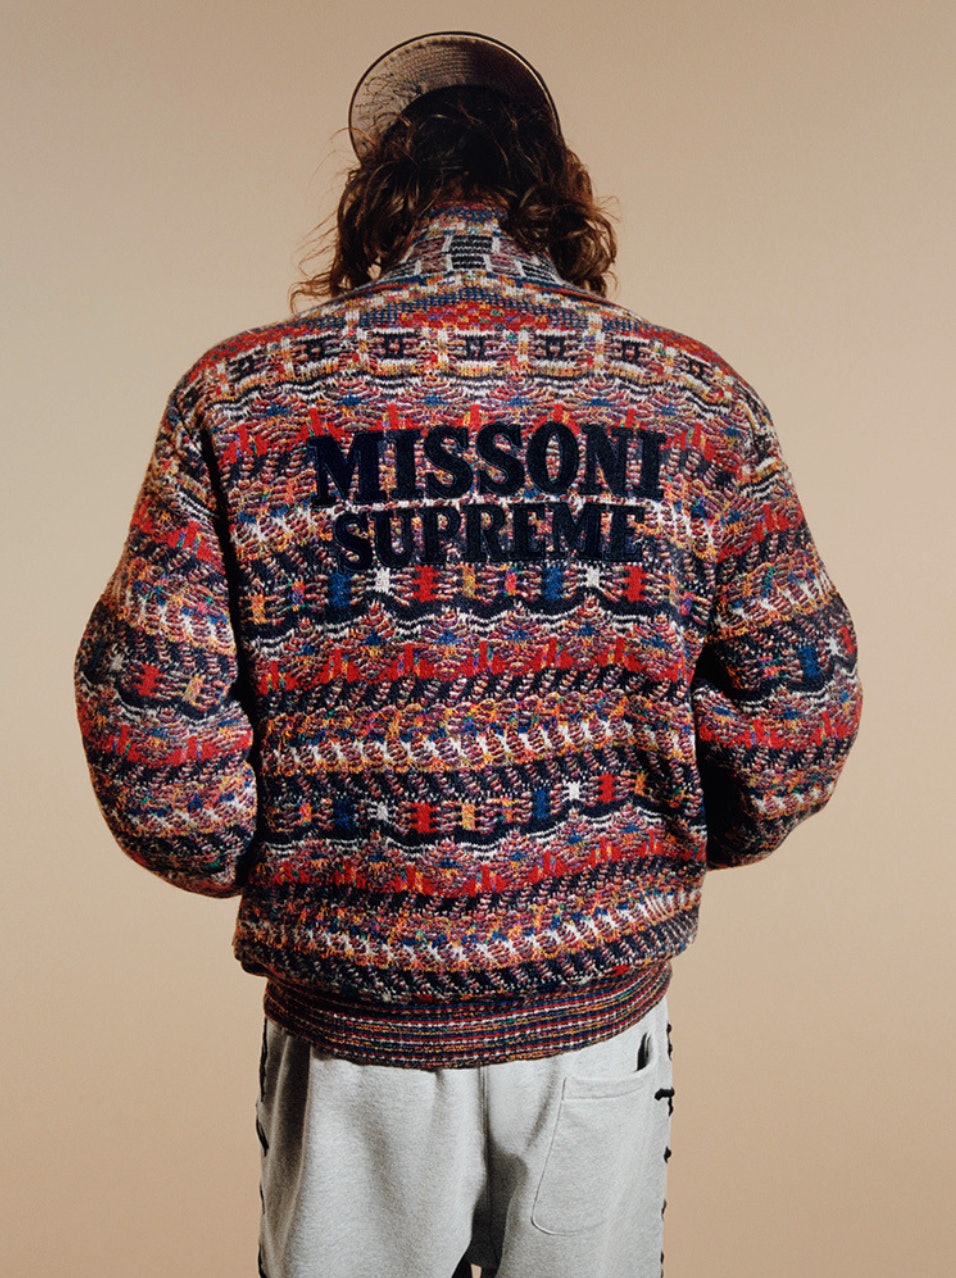 Supreme's retro Missoni collab is all about knitted, colorful apparel